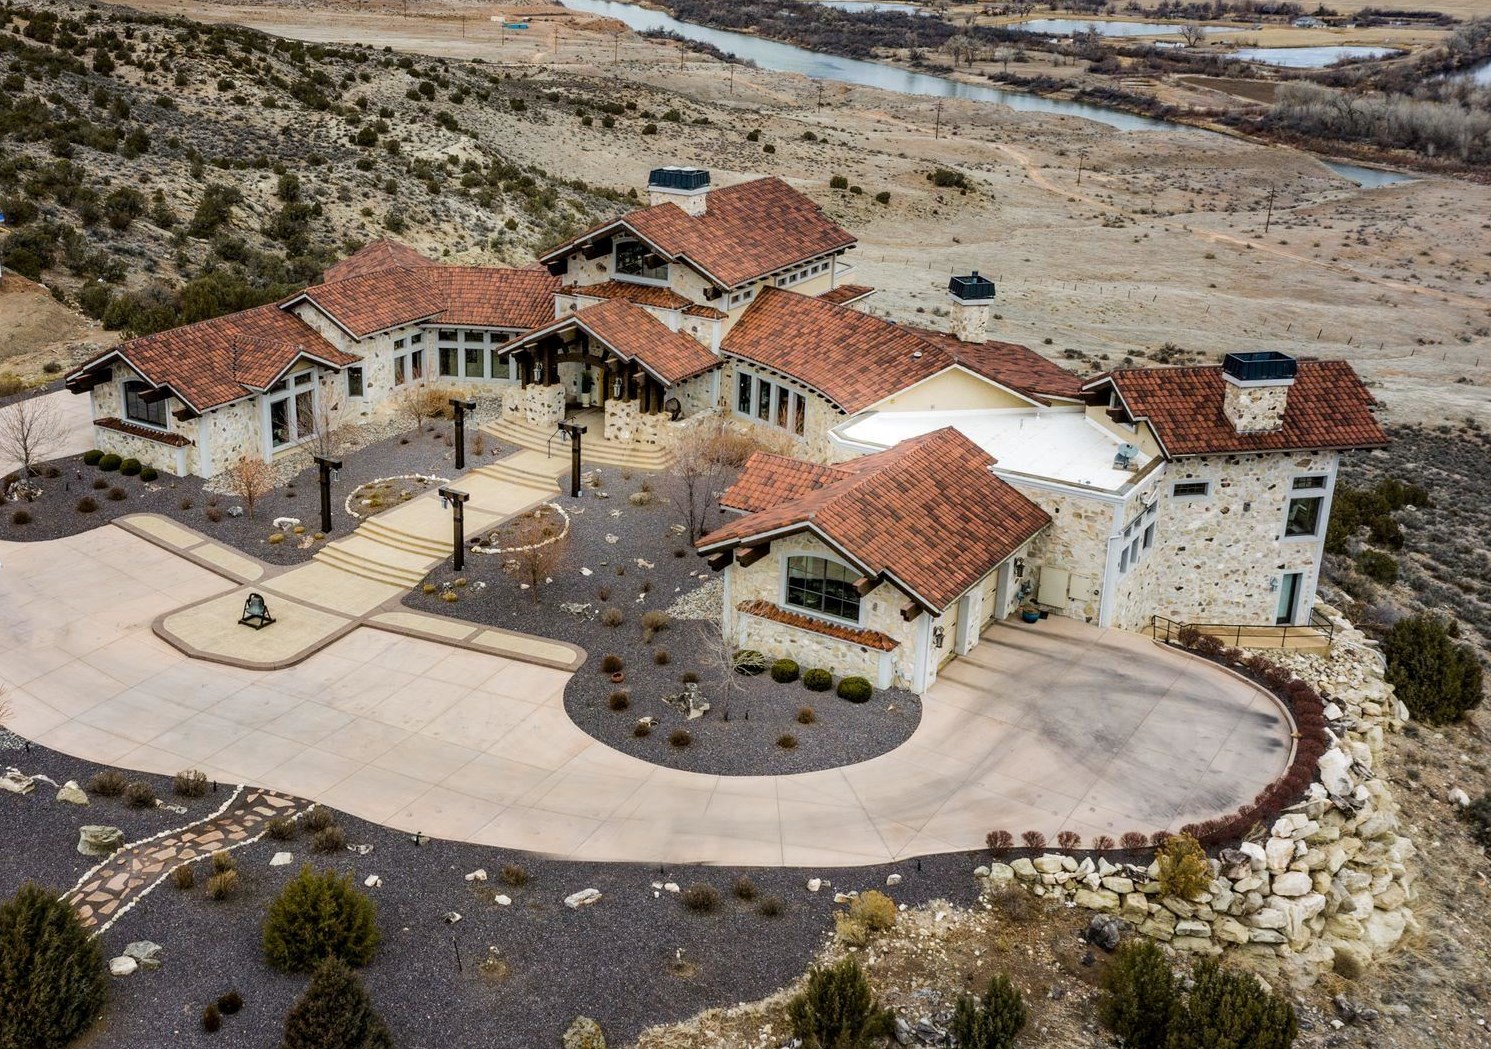 Do not miss your opportunity to own this captivating and timeless Grand Junction Estate. Nestled on 2.35 acres and breathtaking 365 degree views. Inside you will find dramatic 34' tall ceilings, custom travertine floors, an astonishing stone, floor- to- ceiling fireplace, chef's dream kitchen complete with a butler kitchen. The owner's suite has a true retreat feel. The temperature controlled wine room is sure to  satisfy the fussiest wine collector. Every window is a picture perfect view of the cityscape, Colorado River, Colorado National Monument, The Grand Mesa and the Bookcliff's. Downstairs you will find a game room, a custom Home Theatre and a 6 person steam room. The guest wing features a powder room, 2 guest suites (each with en suites) and private entrances. The home has 2 garages on opposite ends of the home. The house was built in 2006 and took over two years to complete. The stone was quarried on site. The home runs on Geothermal for heating and cooling and the exterior walls are 12" thick. Out back you will enjoy those stunning Colorado Sunsets on your ultra private patio. The  suspended patio overlooks the Colorado River and has full city views. This outdoor space is  complete with a fireplace, hot tub and room to entertain all your guests.